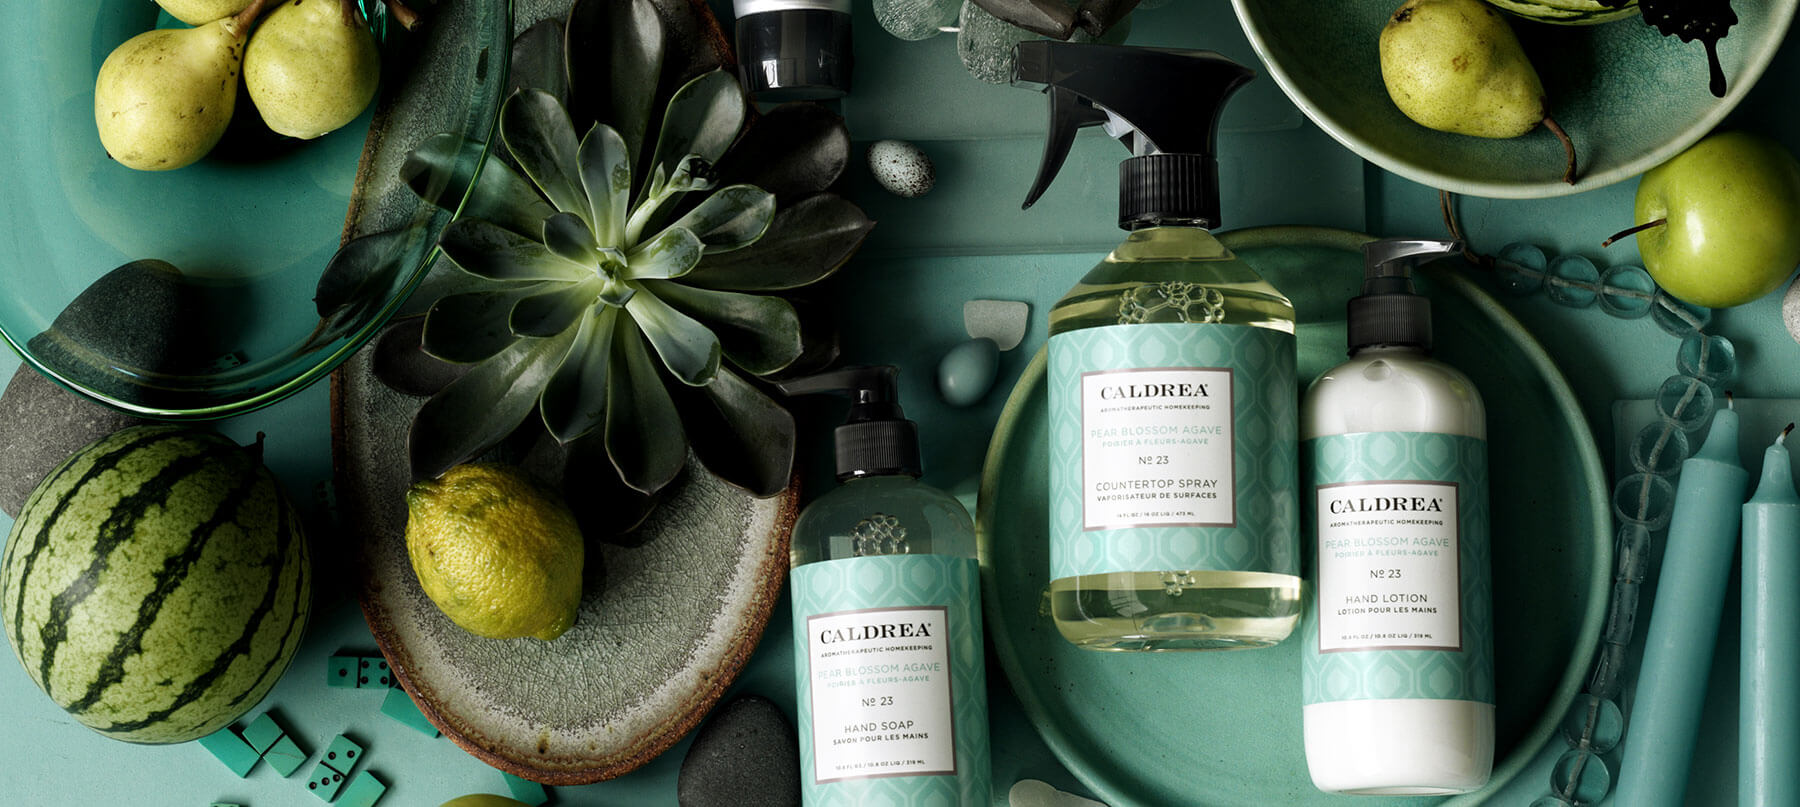 Cleaning is Better with FREE Caldrea Products!